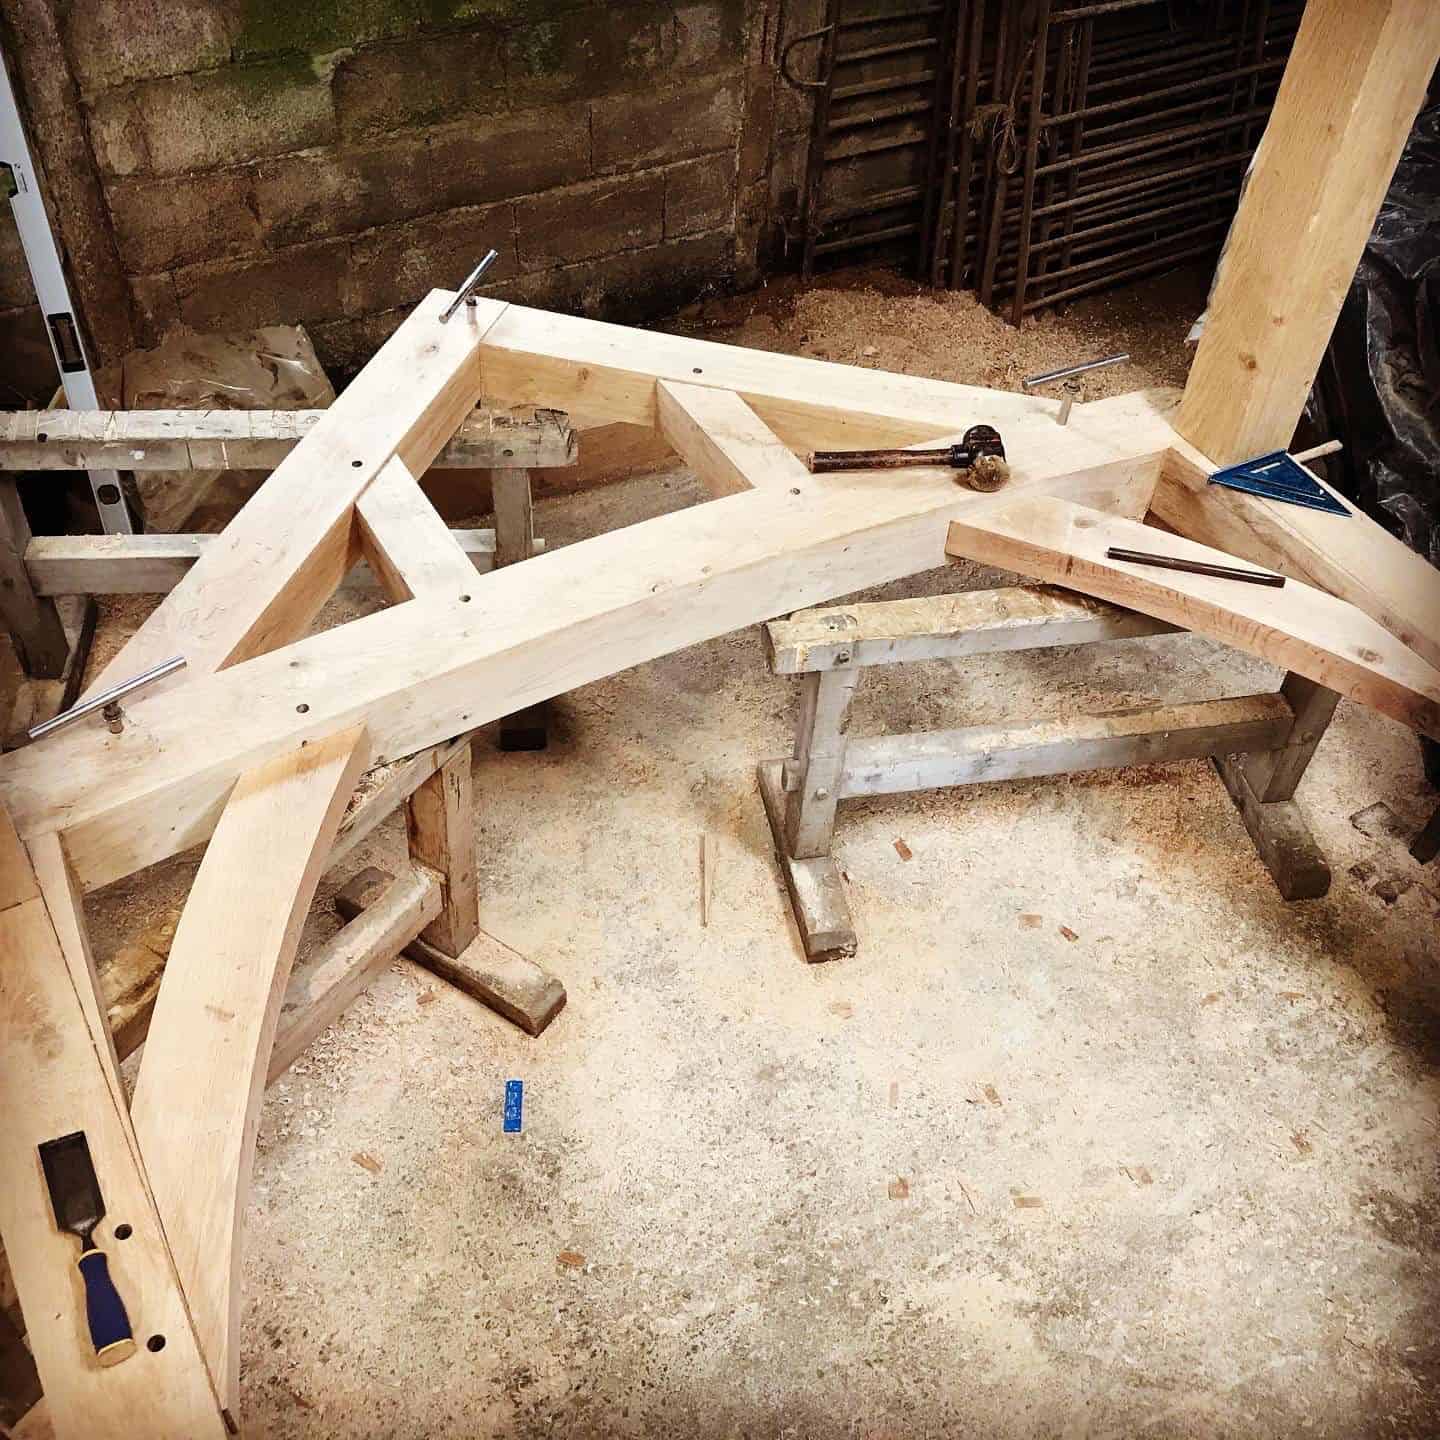 Oak elements being assembled on a workbench with tools scattered around.